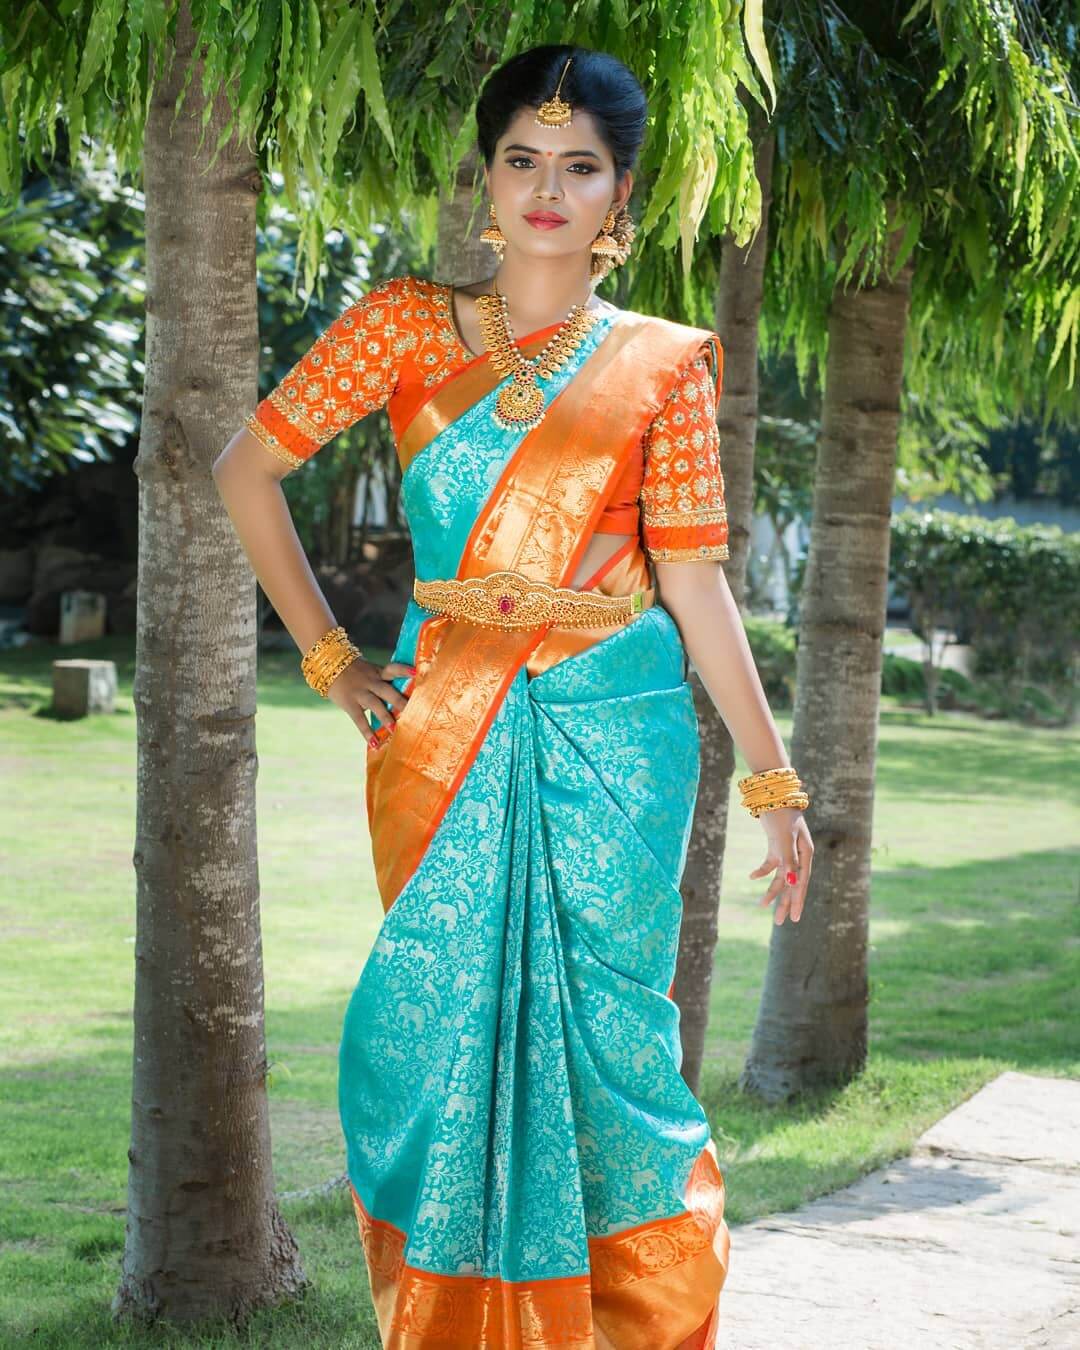 South Indian wedding saree in blue and orange